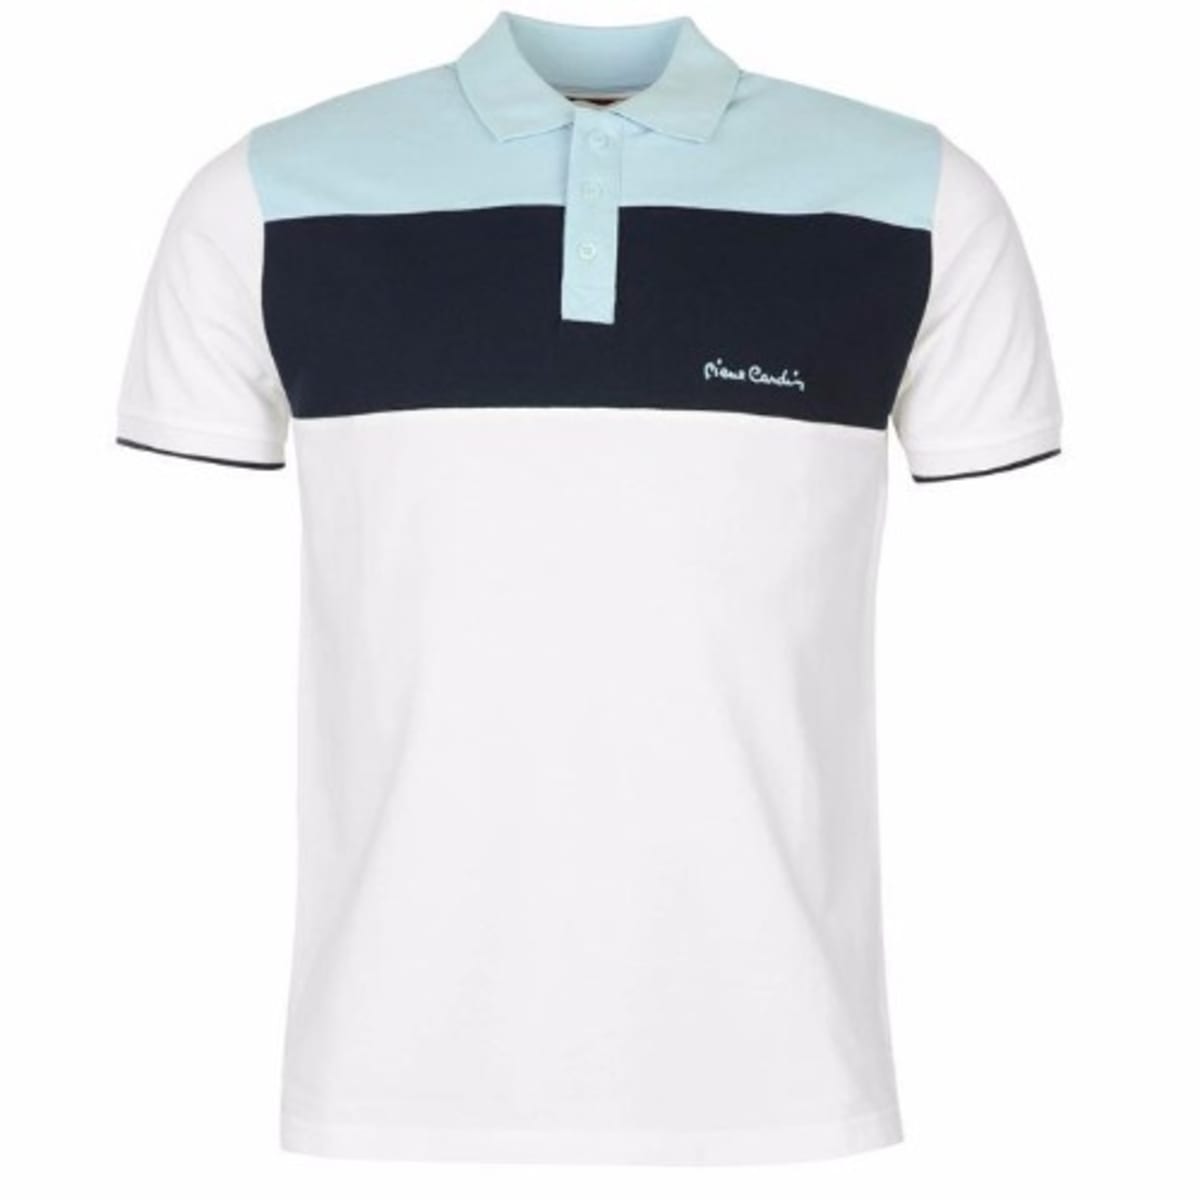 PIERRE RUGBY STRIPE POLO